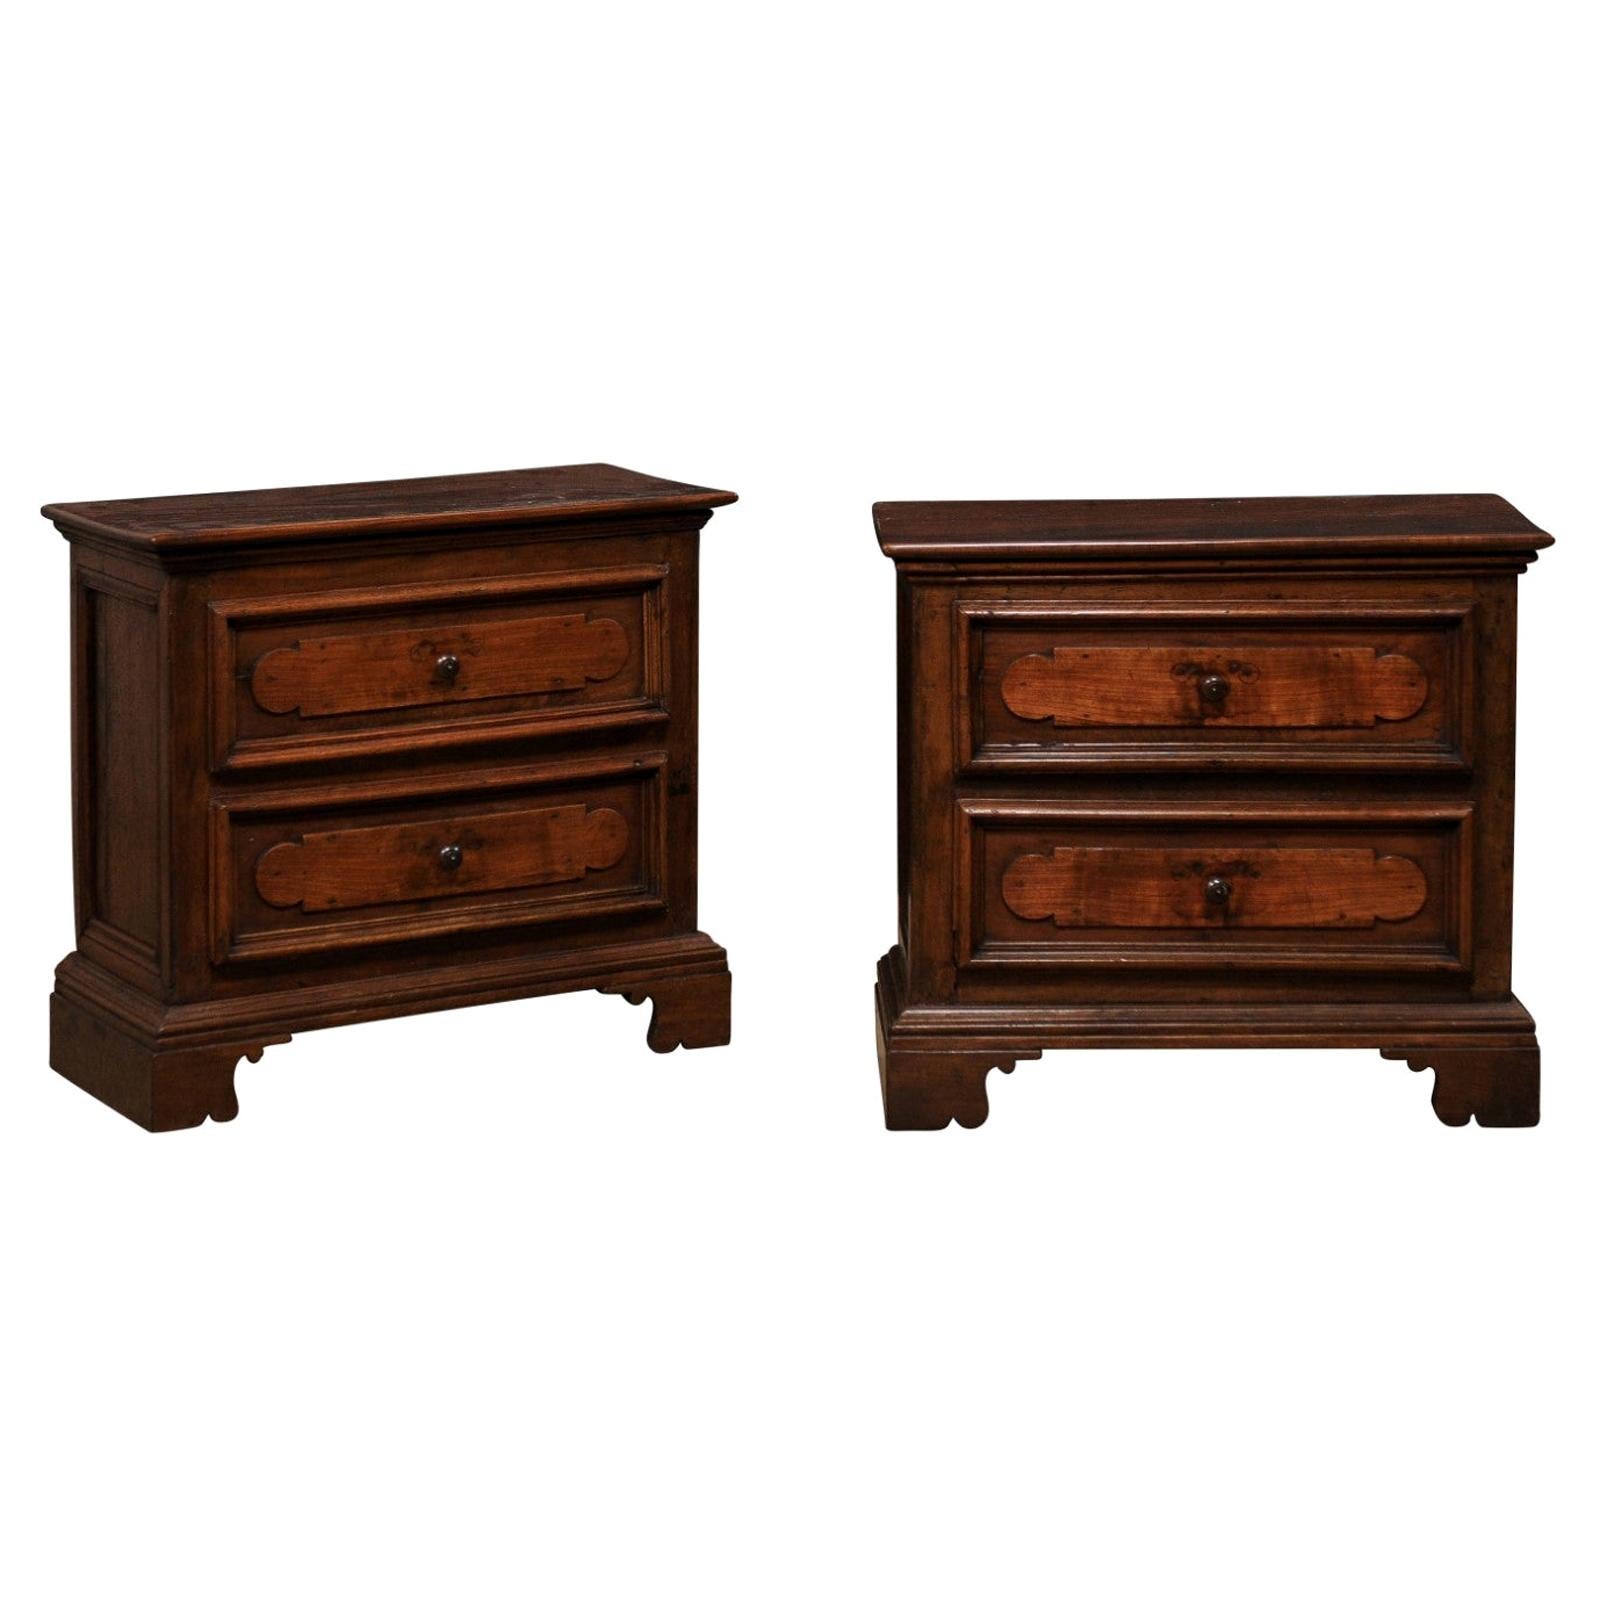 Italian Pair of Walnut Side-Chests with Decoratively Paneled Drawer Fronts